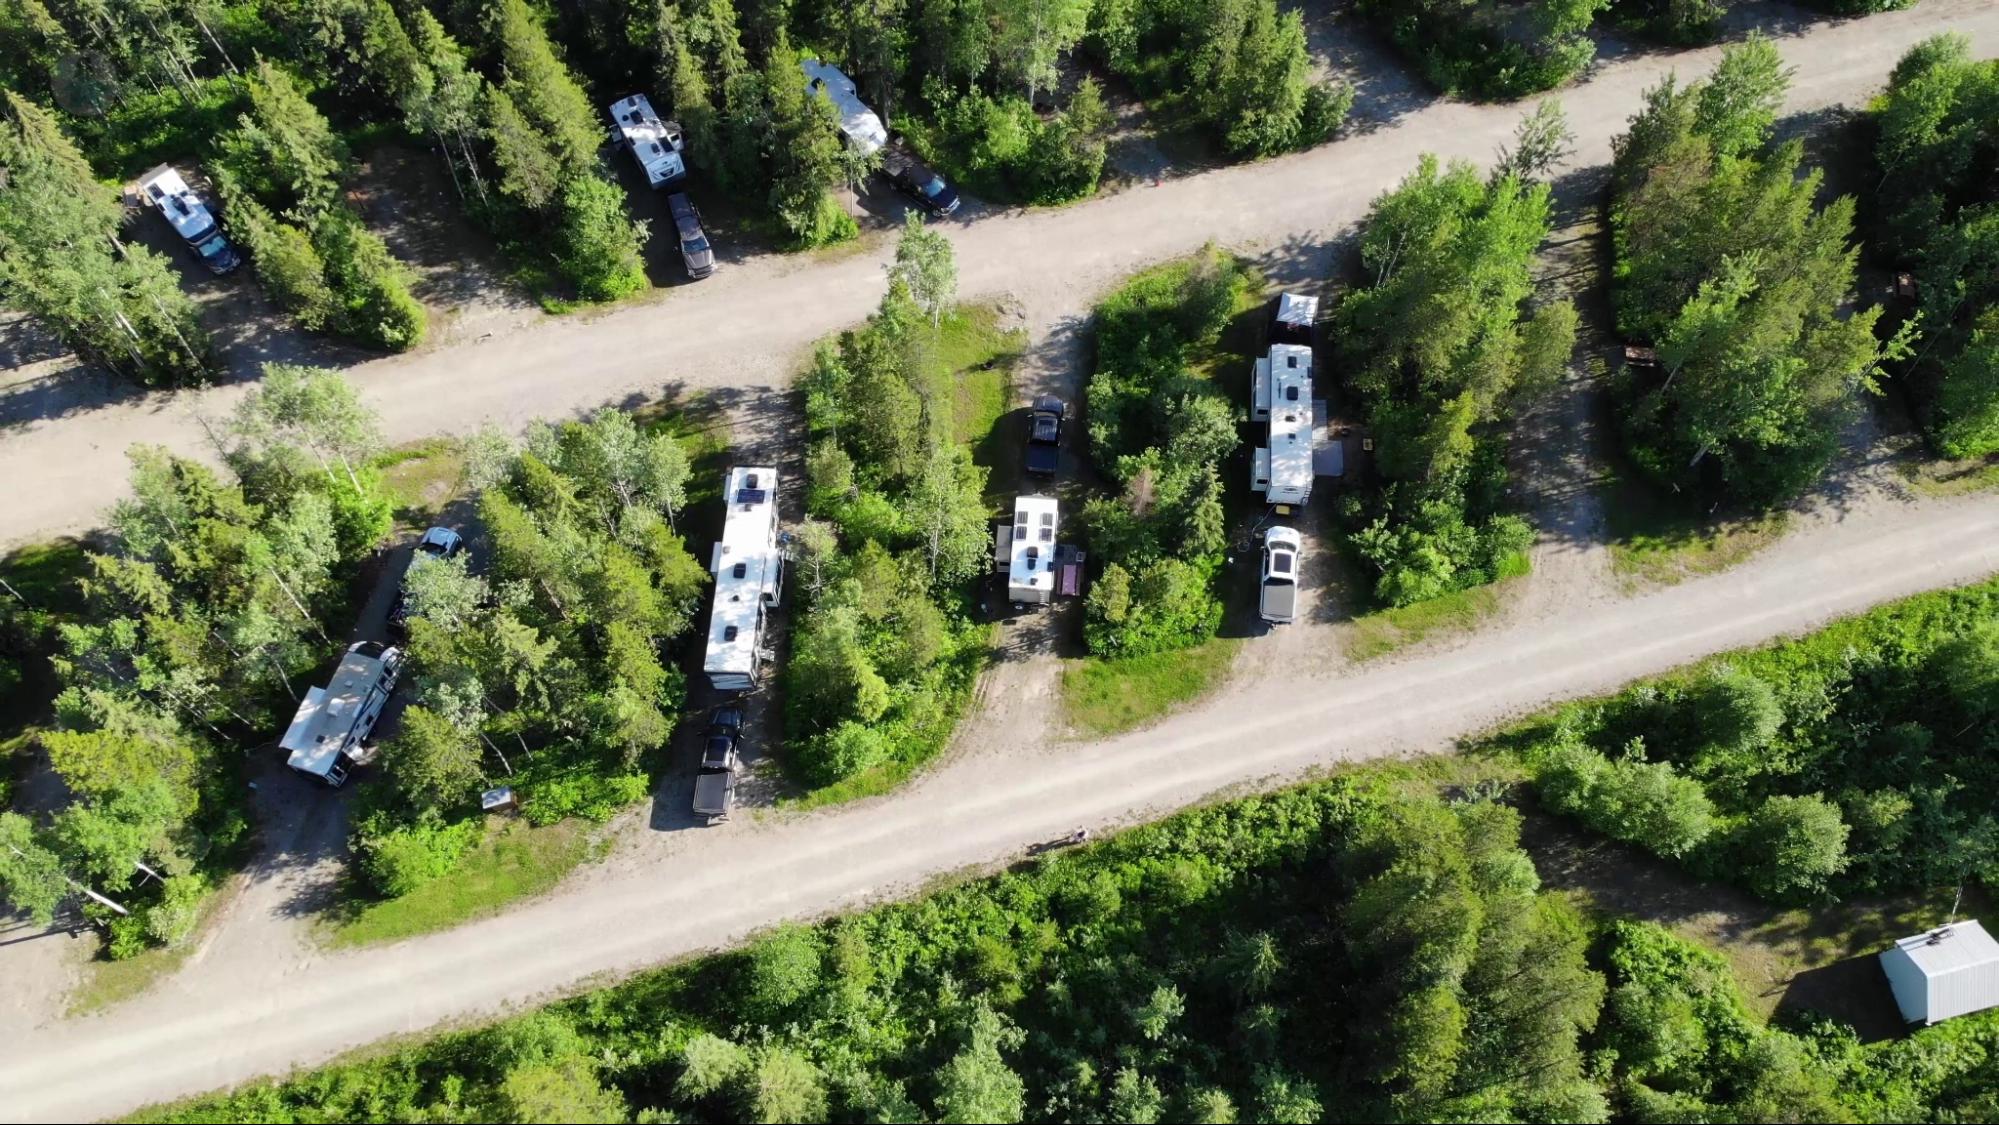 Aerial photo of the large pull-through campsites at MamaYeh RV Park in Prince George, BC, Canada